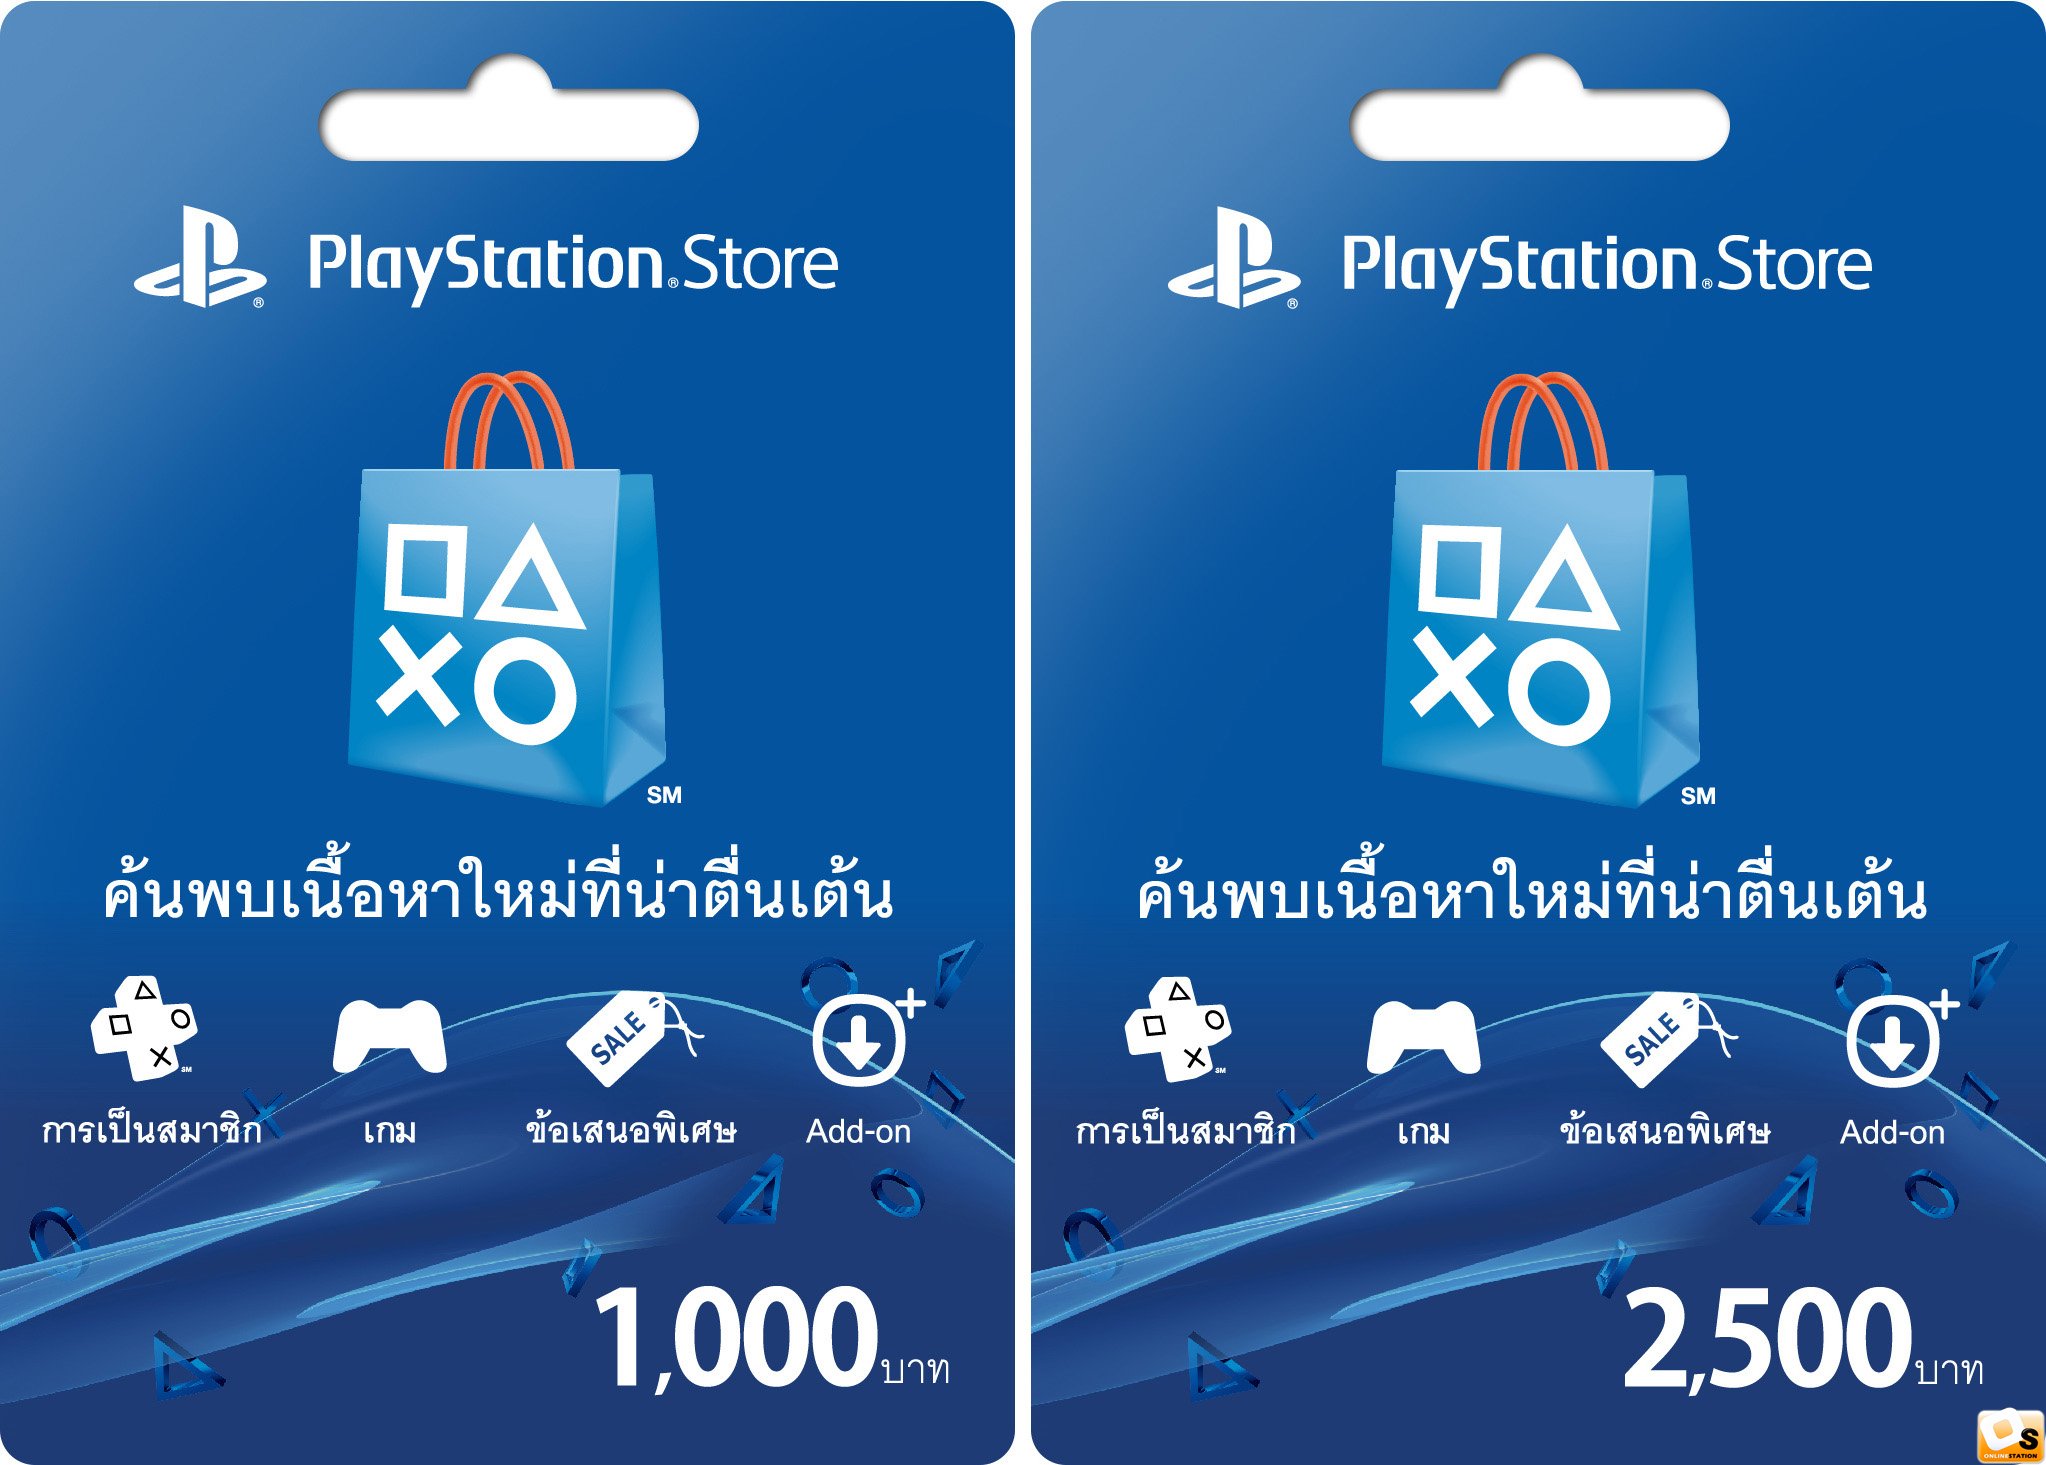 Ps4 store турция. PS Store. Карточки PS Store. Карта PSN. Карты пополнения PLAYSTATION Store.